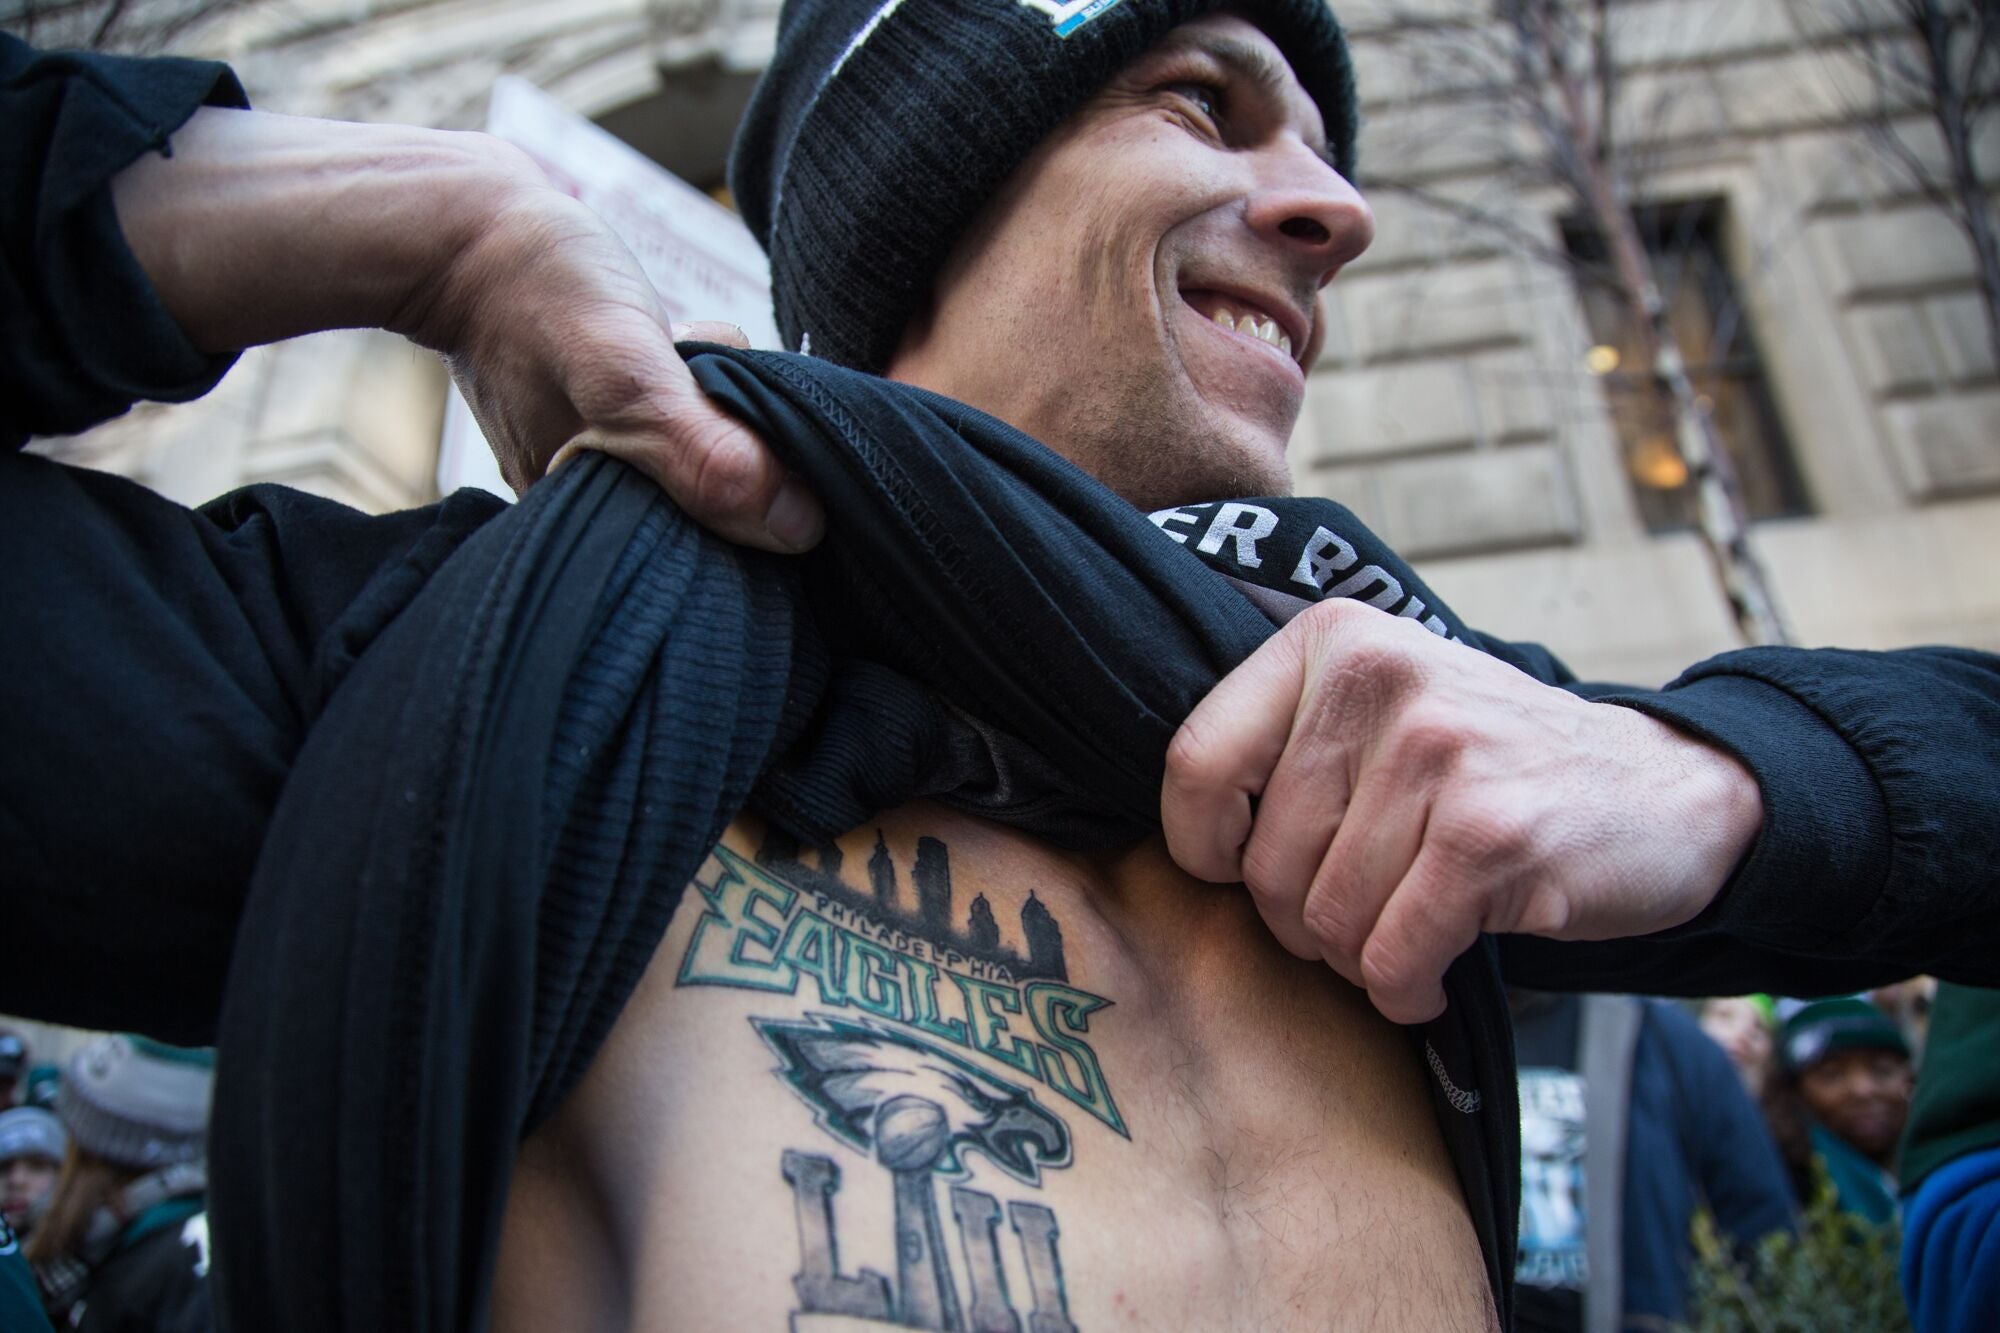 A fresh and accurate tattoo commemorating the Eagles' win. Credit: Emily Cohen/WHYY